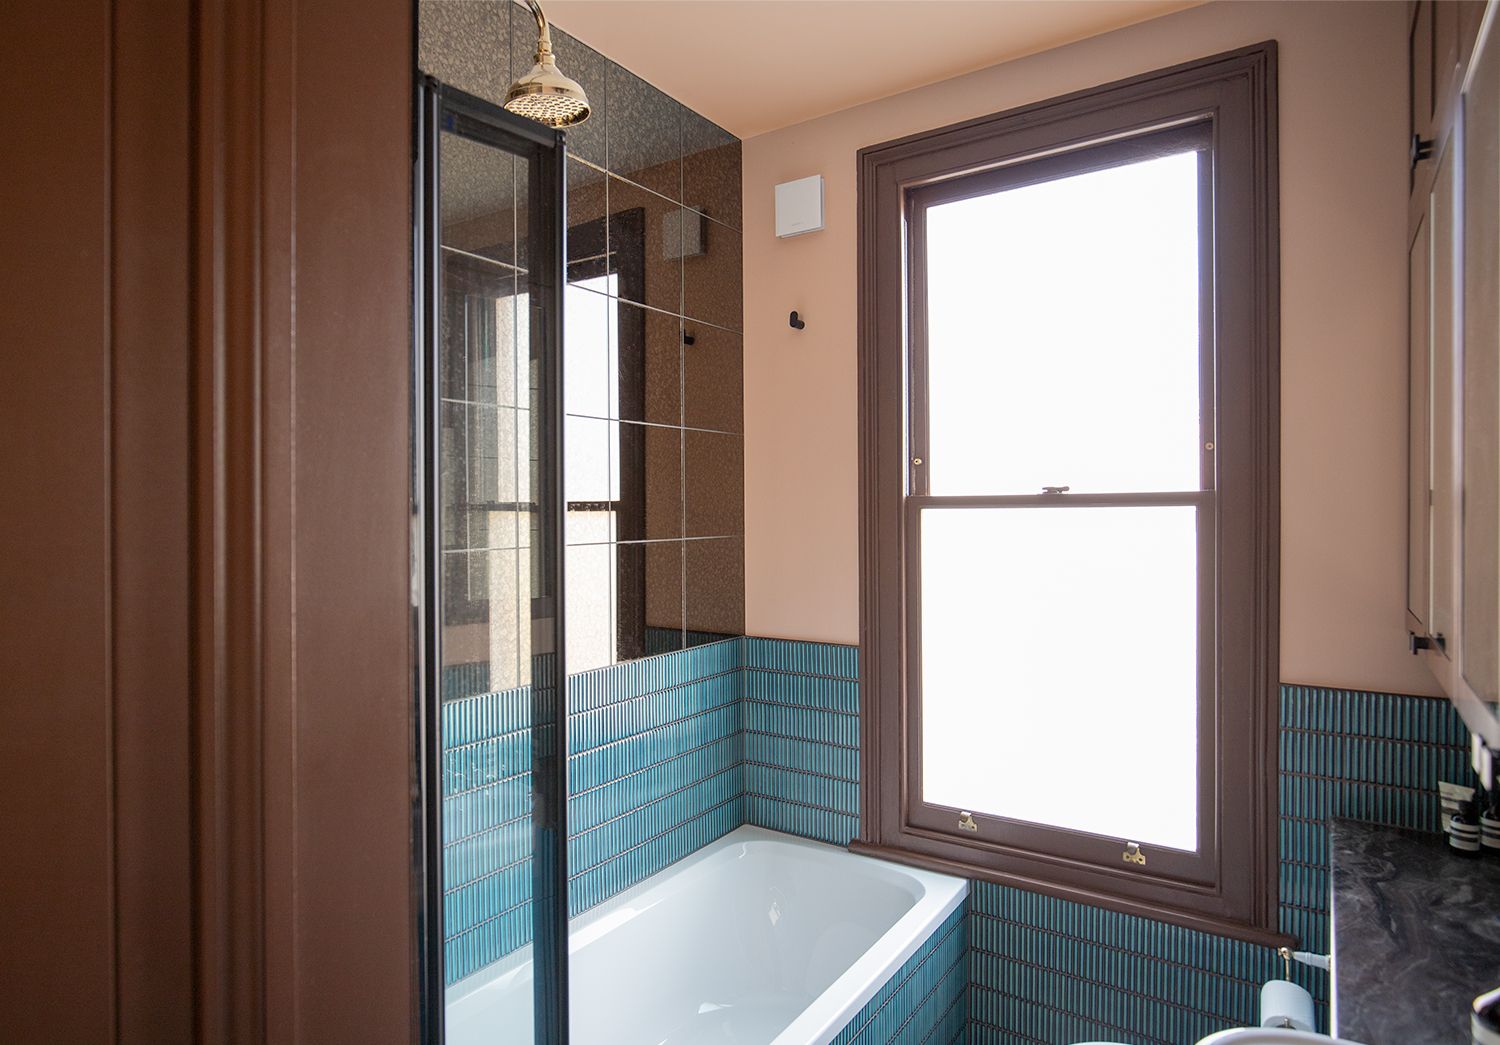 A photo of the bathroom showing the pink walls, brown woodwork and blue tiles.